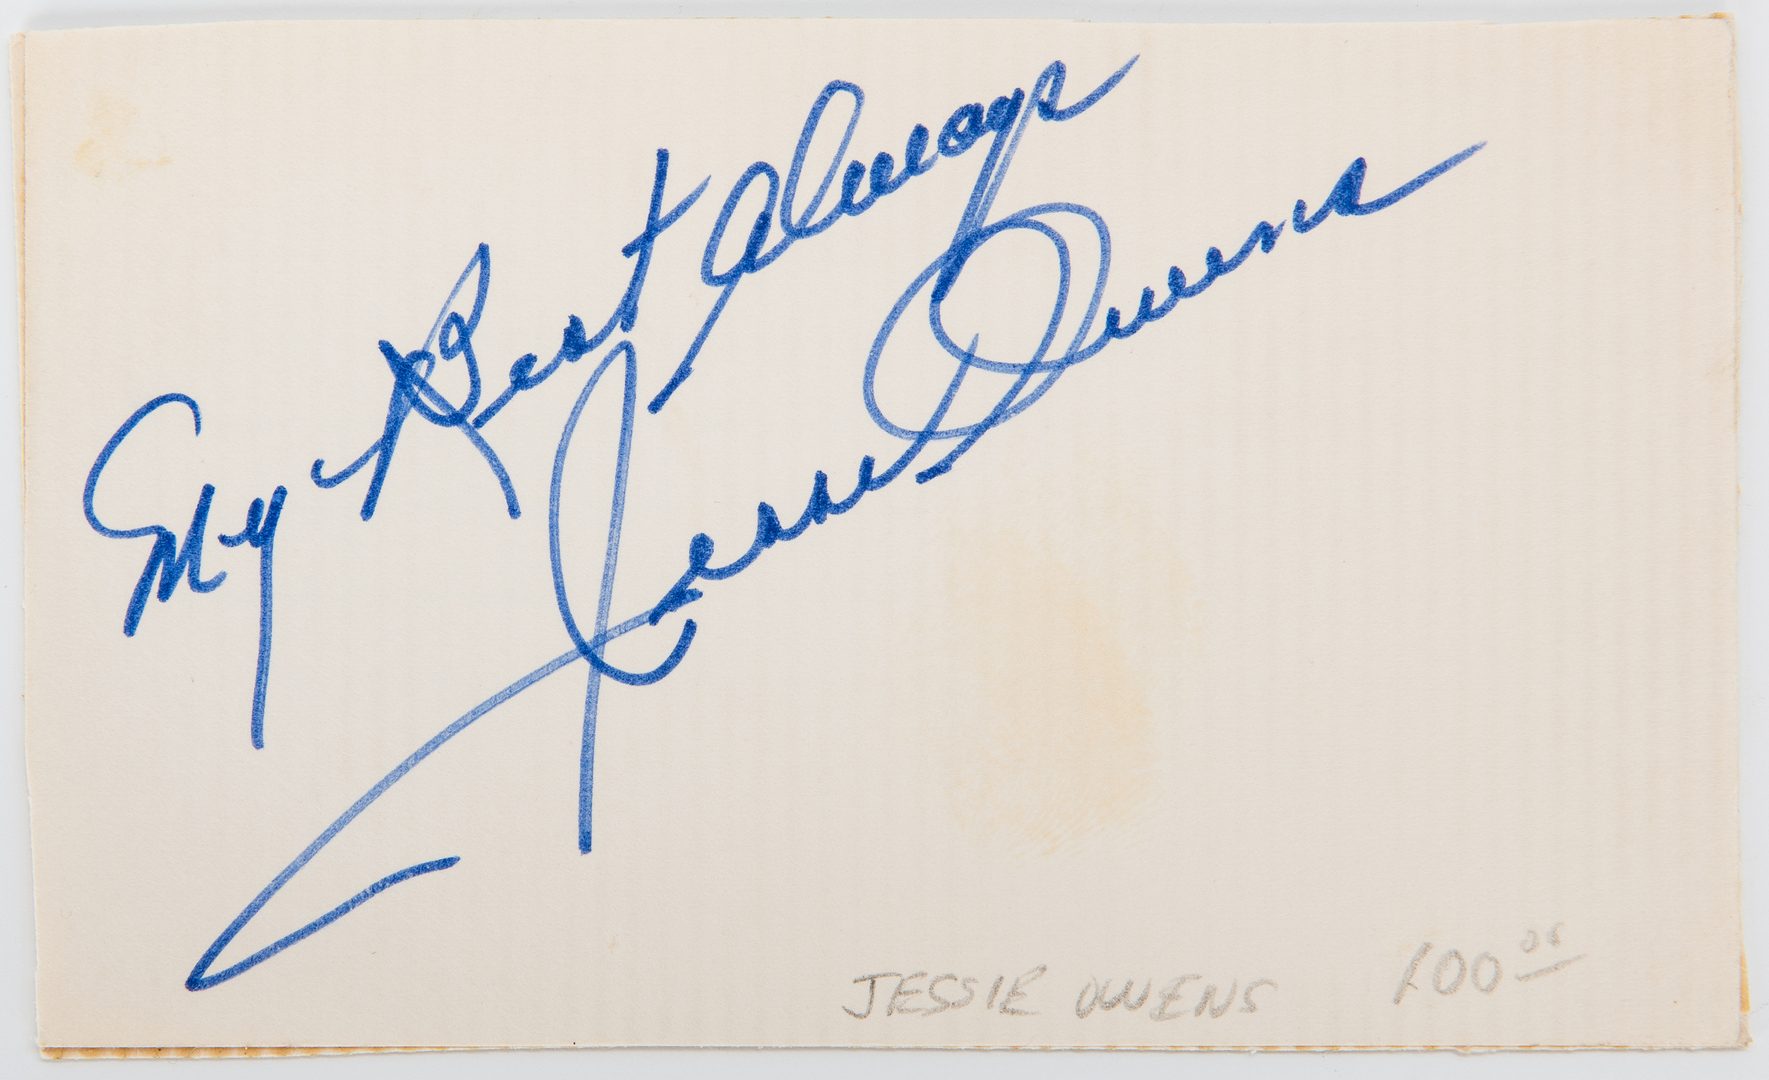 Lot 301: Autograph Collection: Sports, World Leaders, Civil Rights